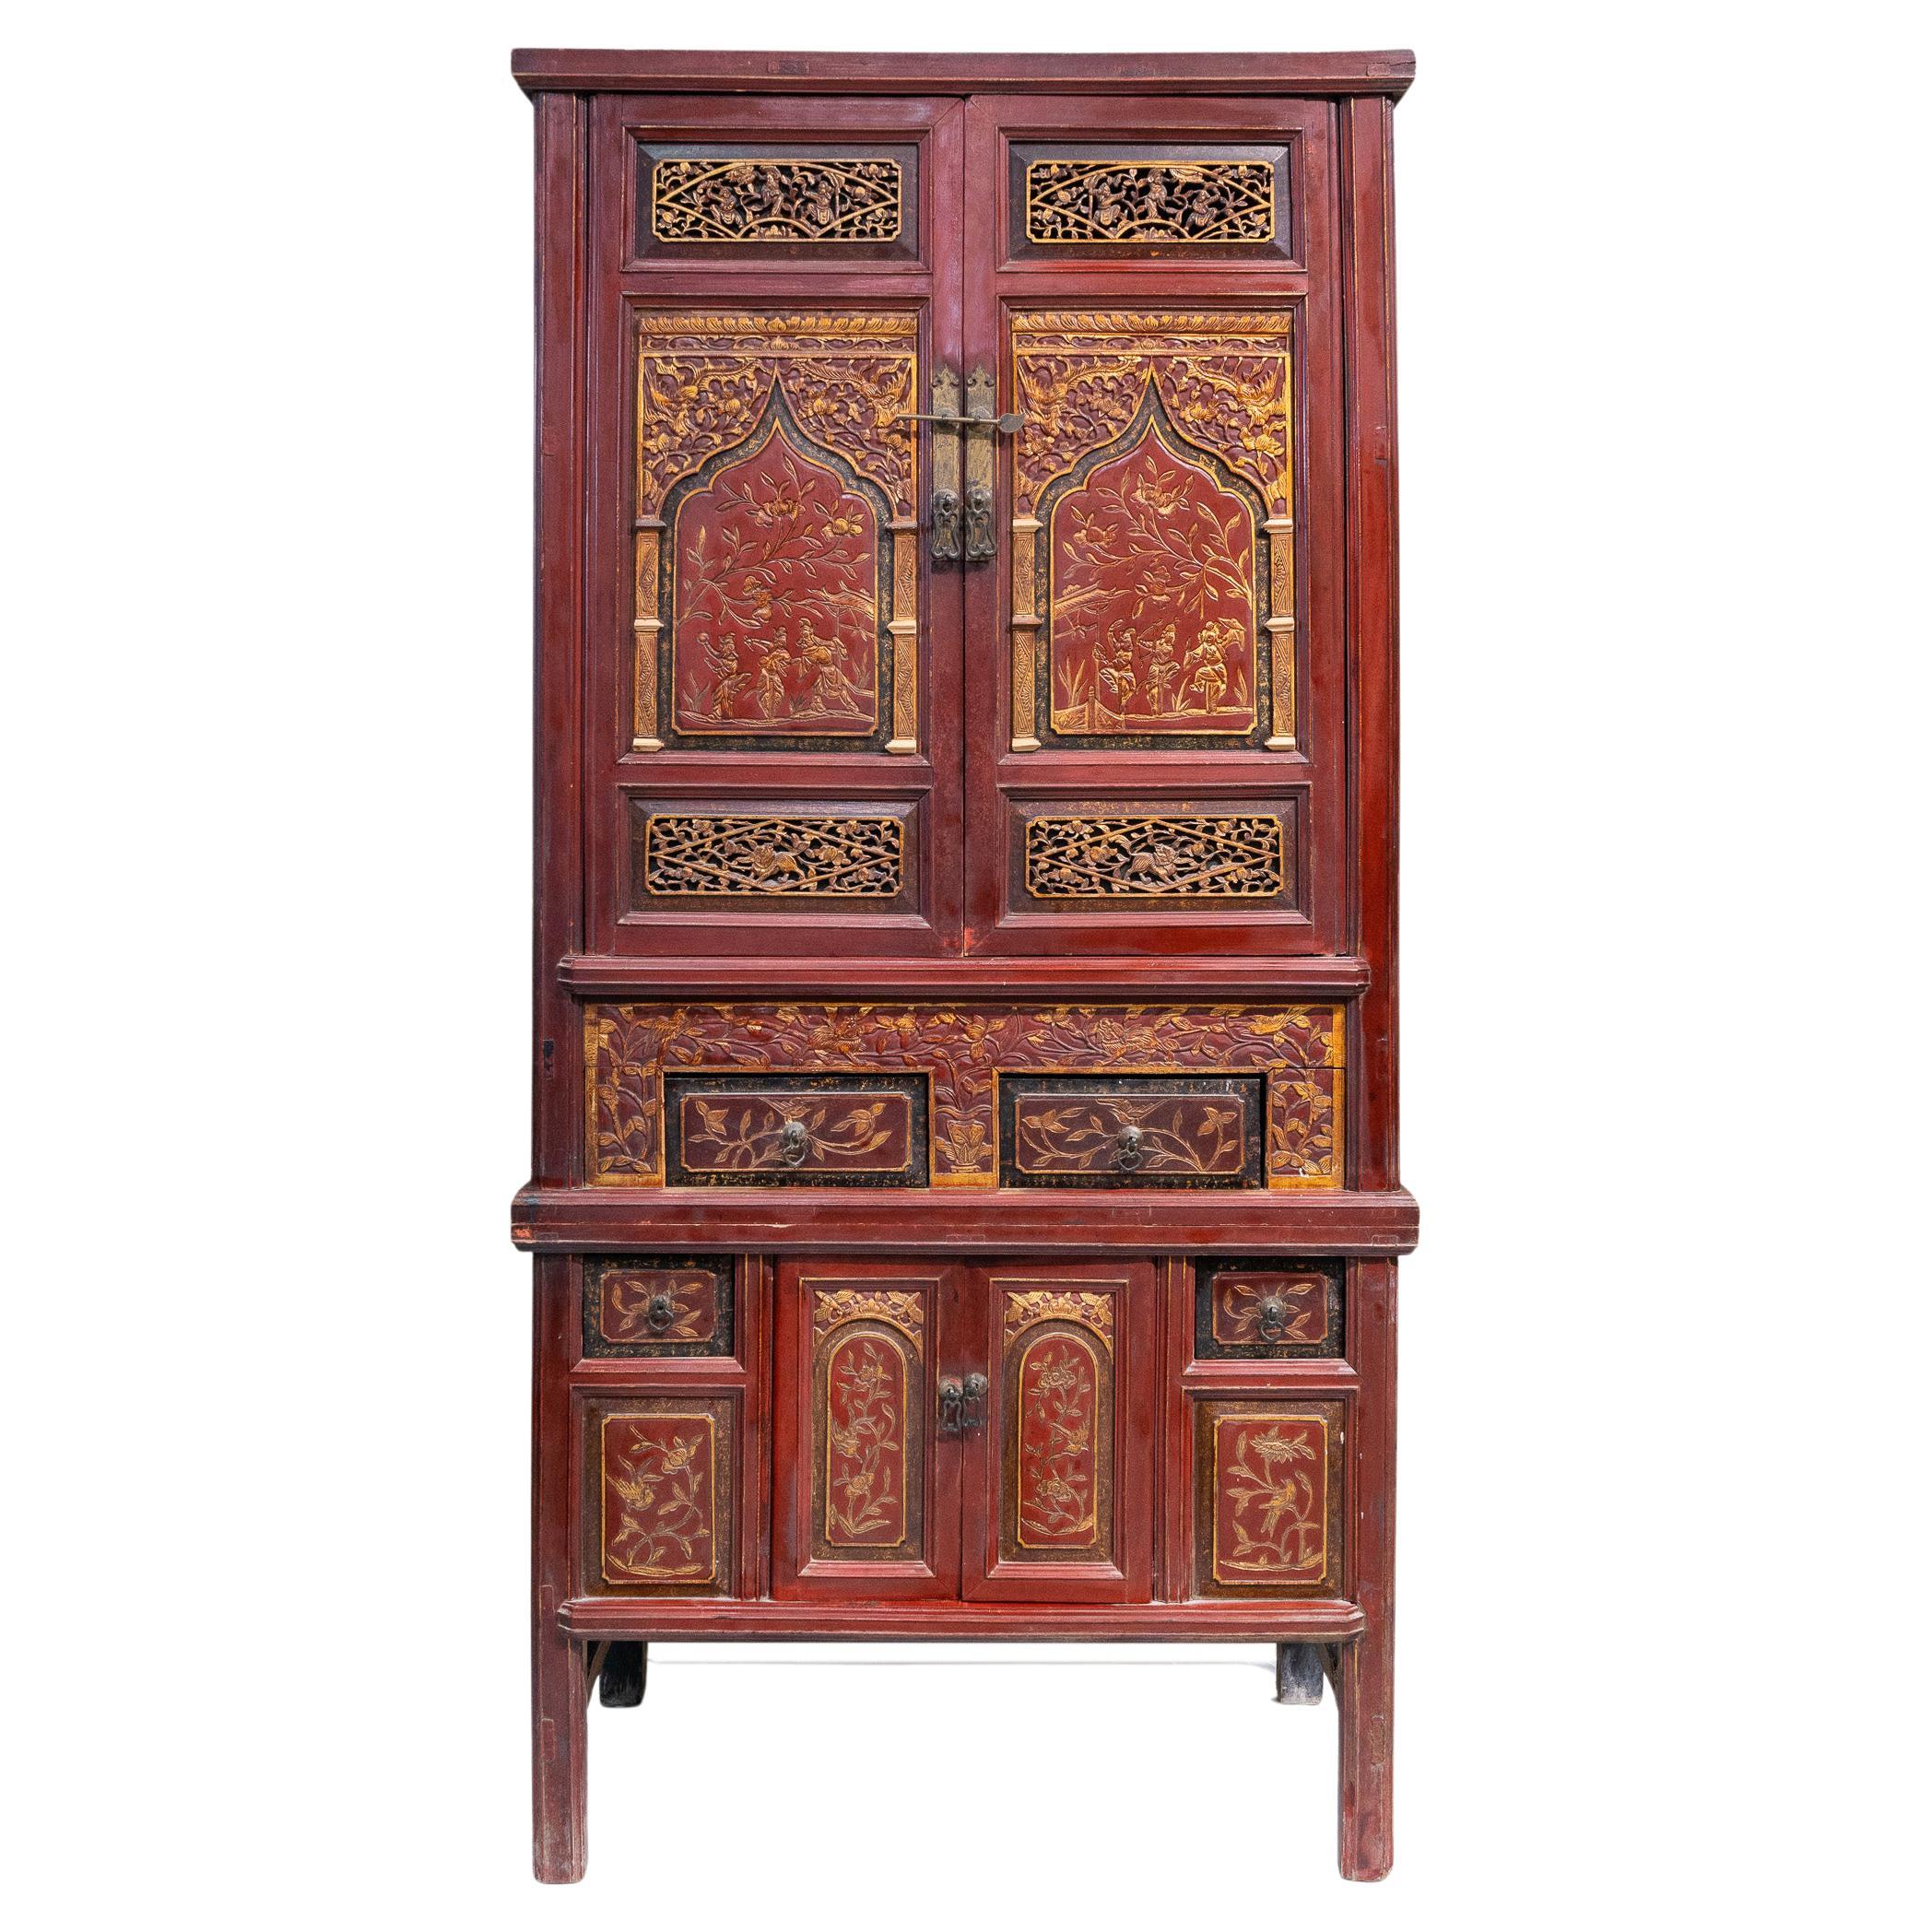 Early 20th Century 2-Tier Cabinet From Fujian, China